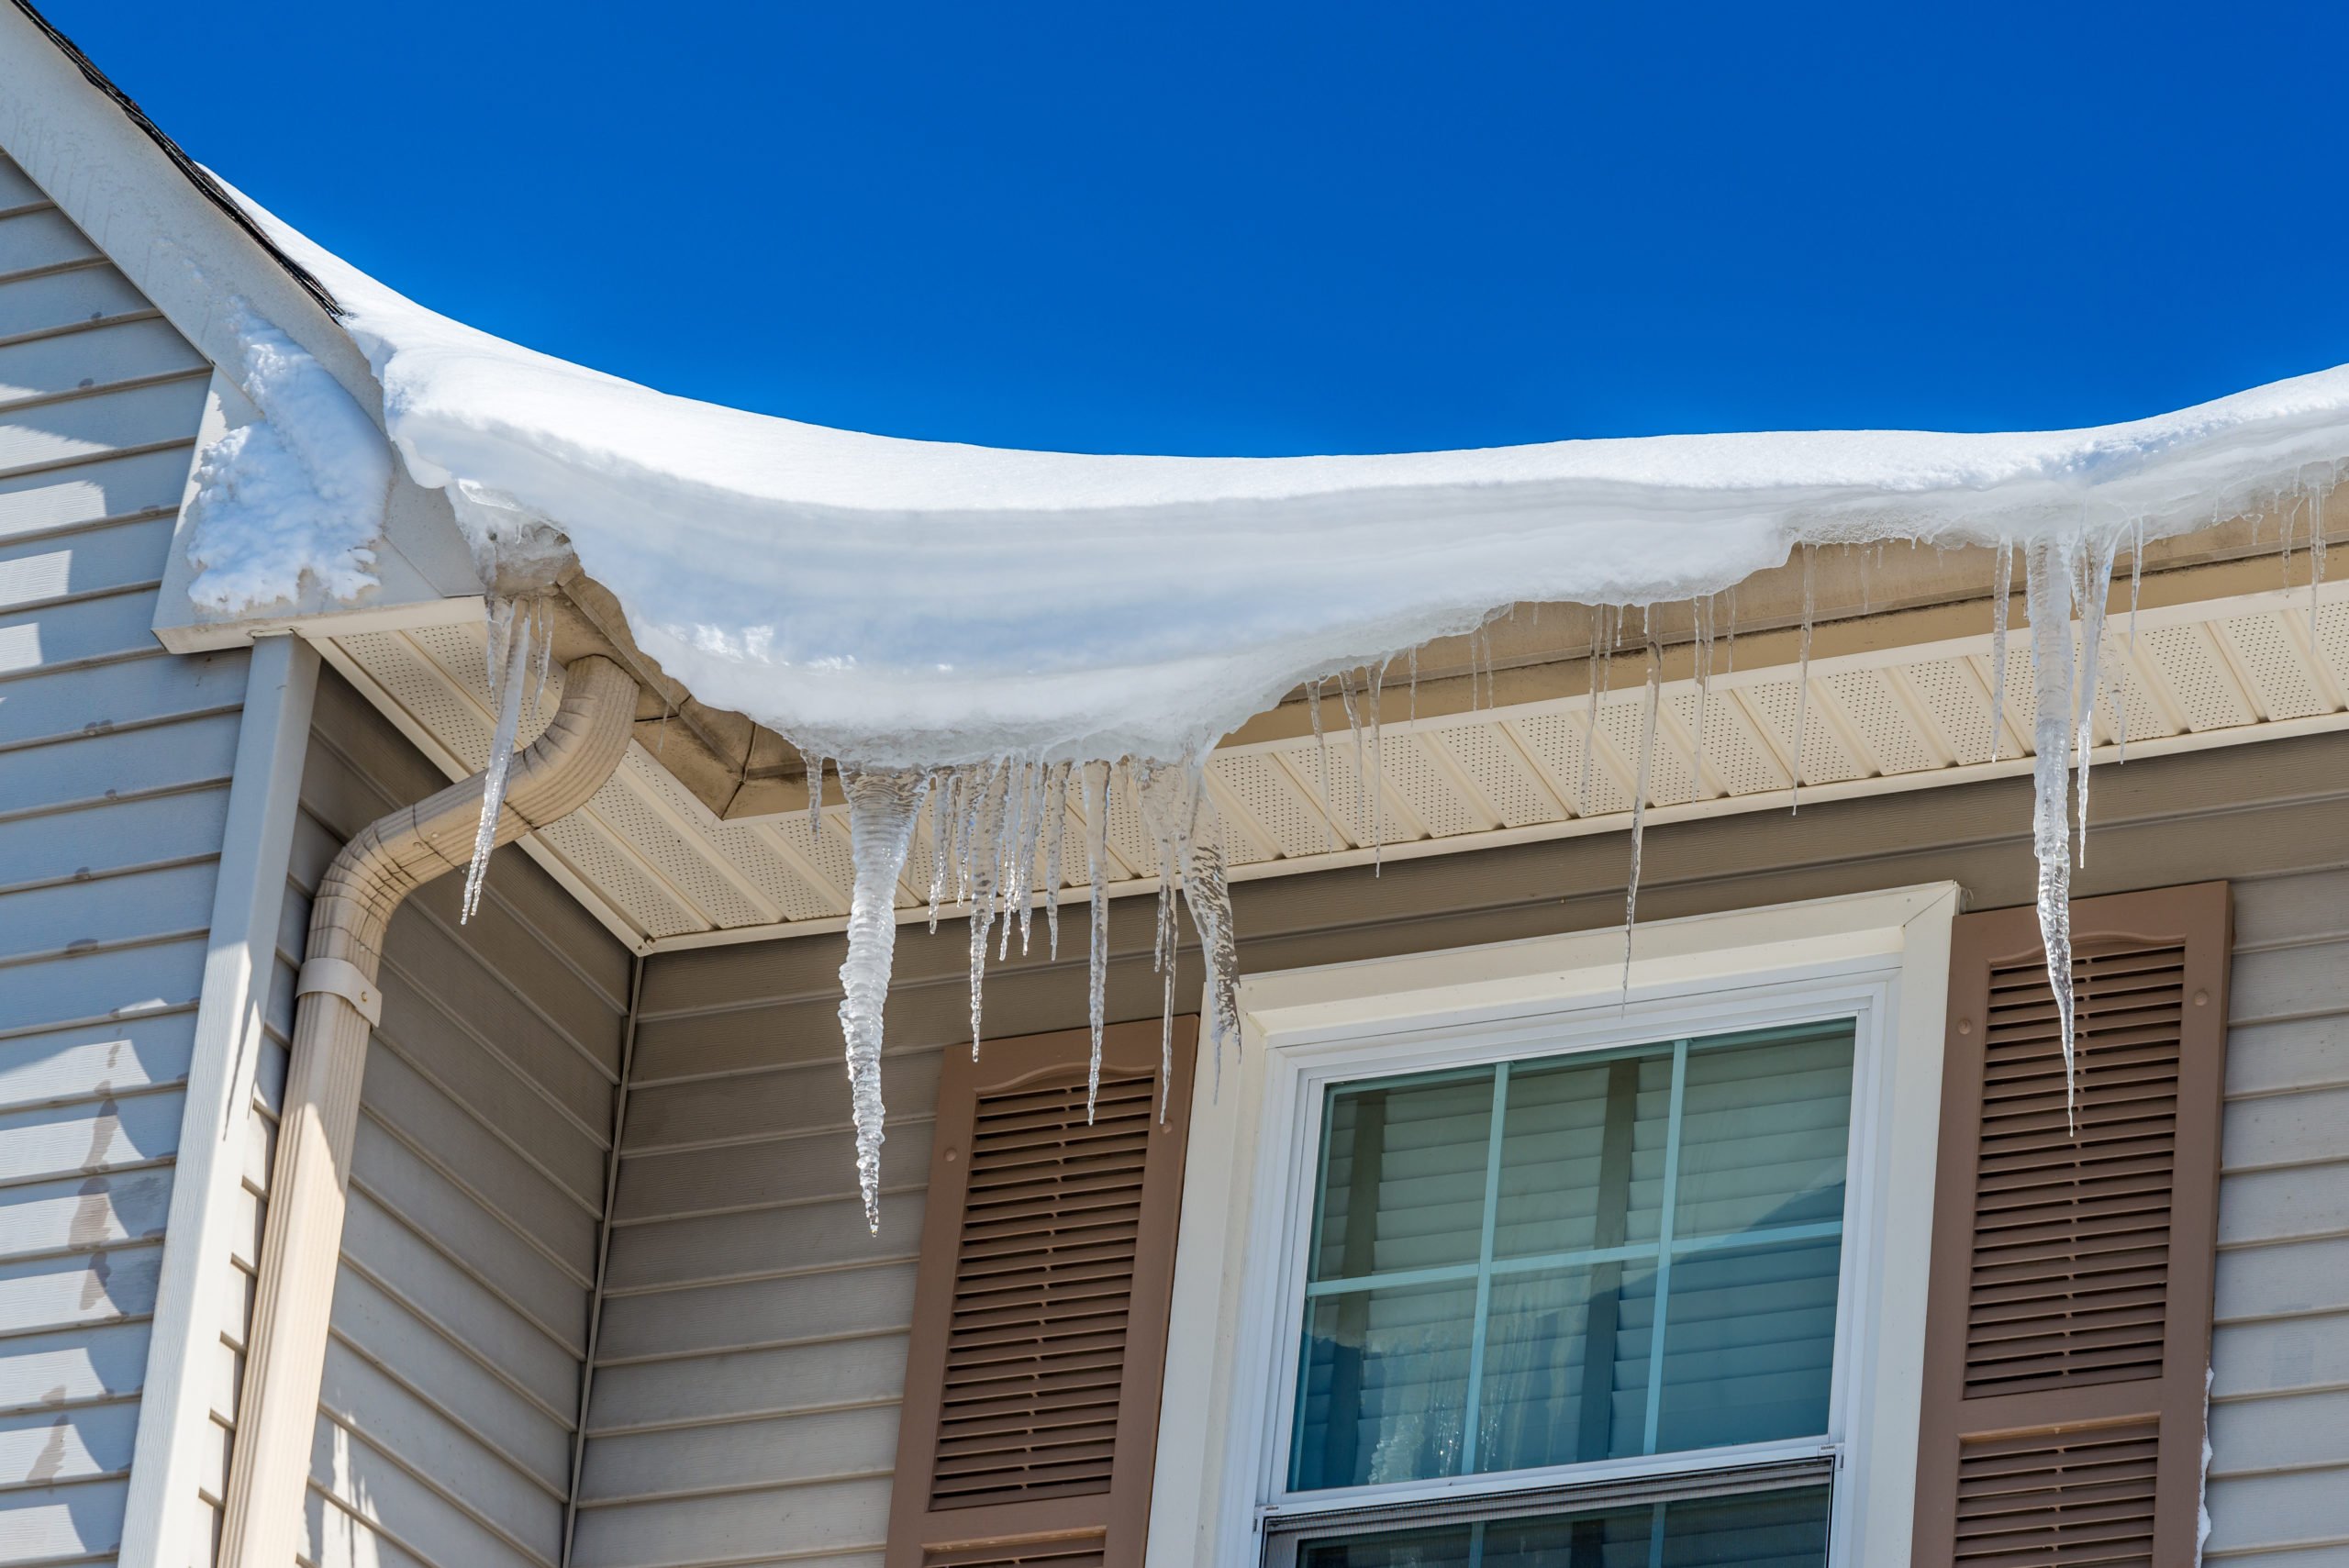 How Could Winter Weather be Affecting My Roof?